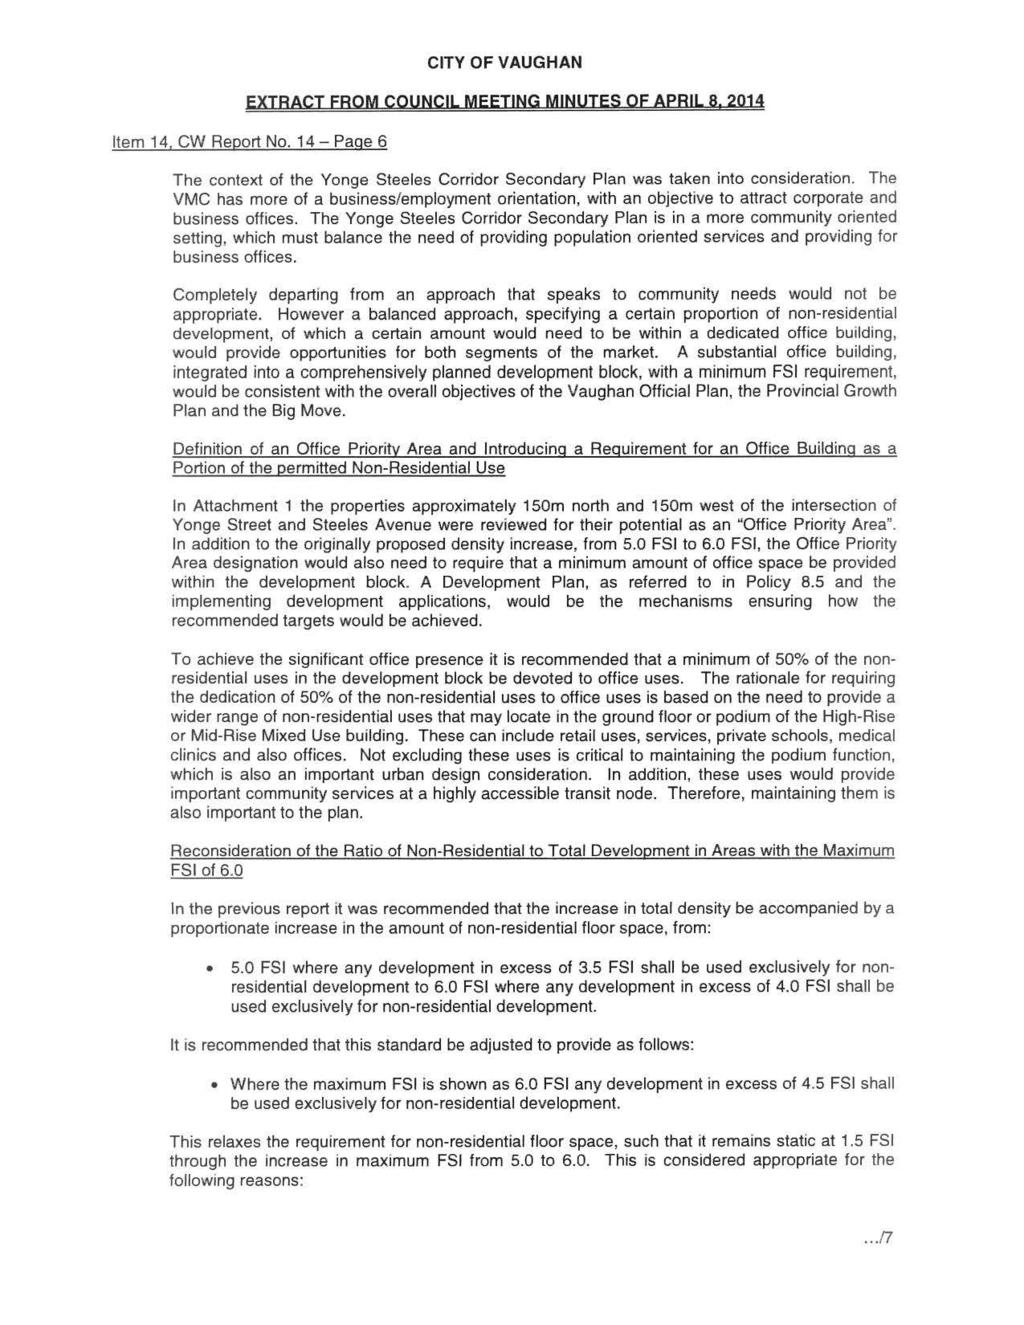 Item 14. CW Report No. 14- Page 6 The context of the Yonge Steeles Corridor Secondary Plan was taken into consideration.